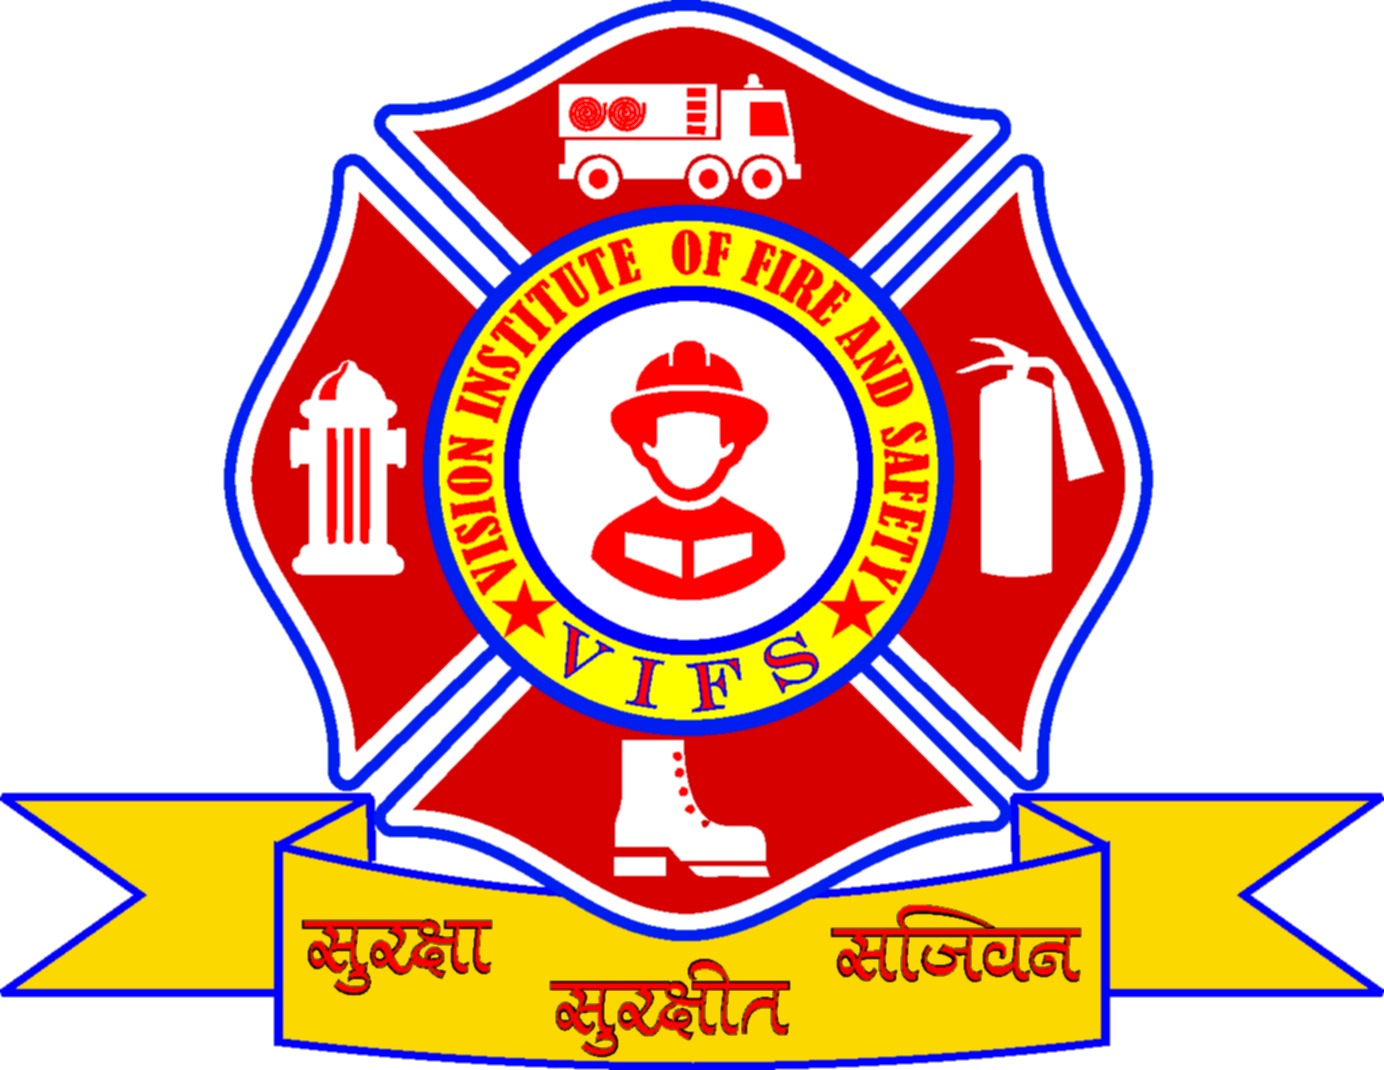 Vision Institute Of Fire And Safety Logo